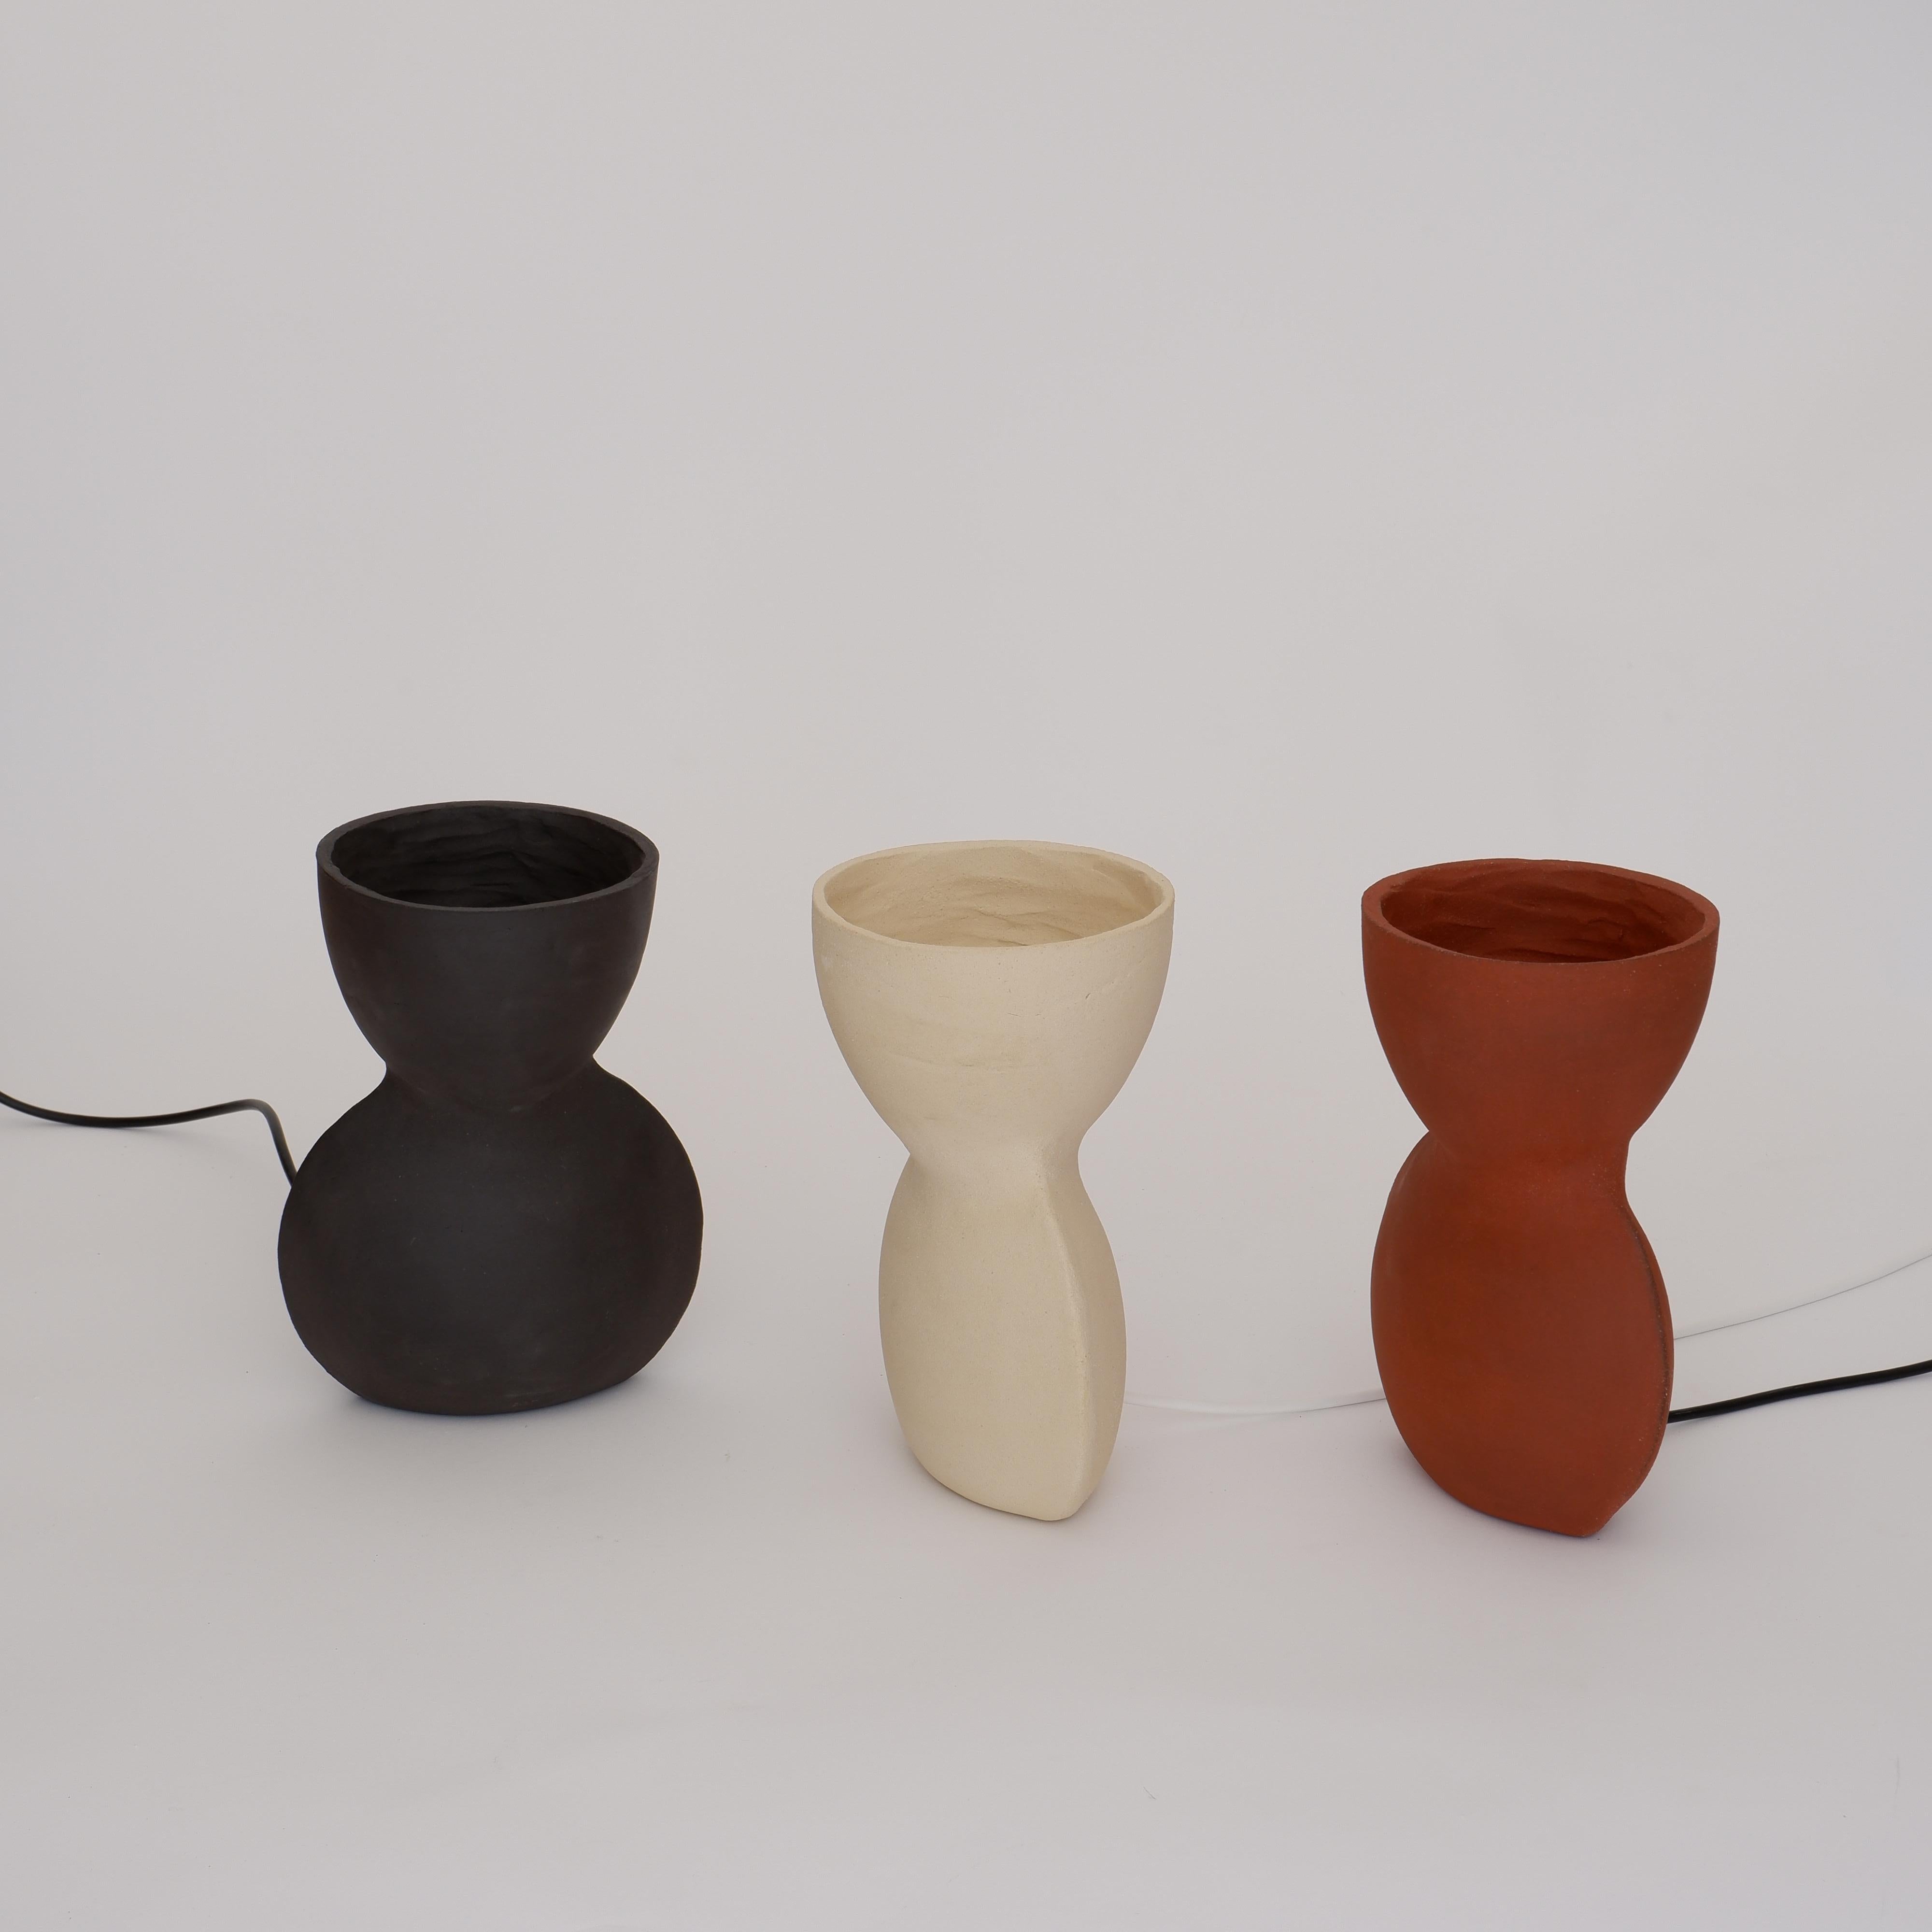 Set Of 3 Unira Small Lamps by Ia Kutateladze
One Of A Kind.
Dimensions: D 14 x W 18 x H 25 cm.
Materials: Clay.

Each piece is one of a kind, due to its free hand-building process. Different color variations available: raw black clay, raw white clay